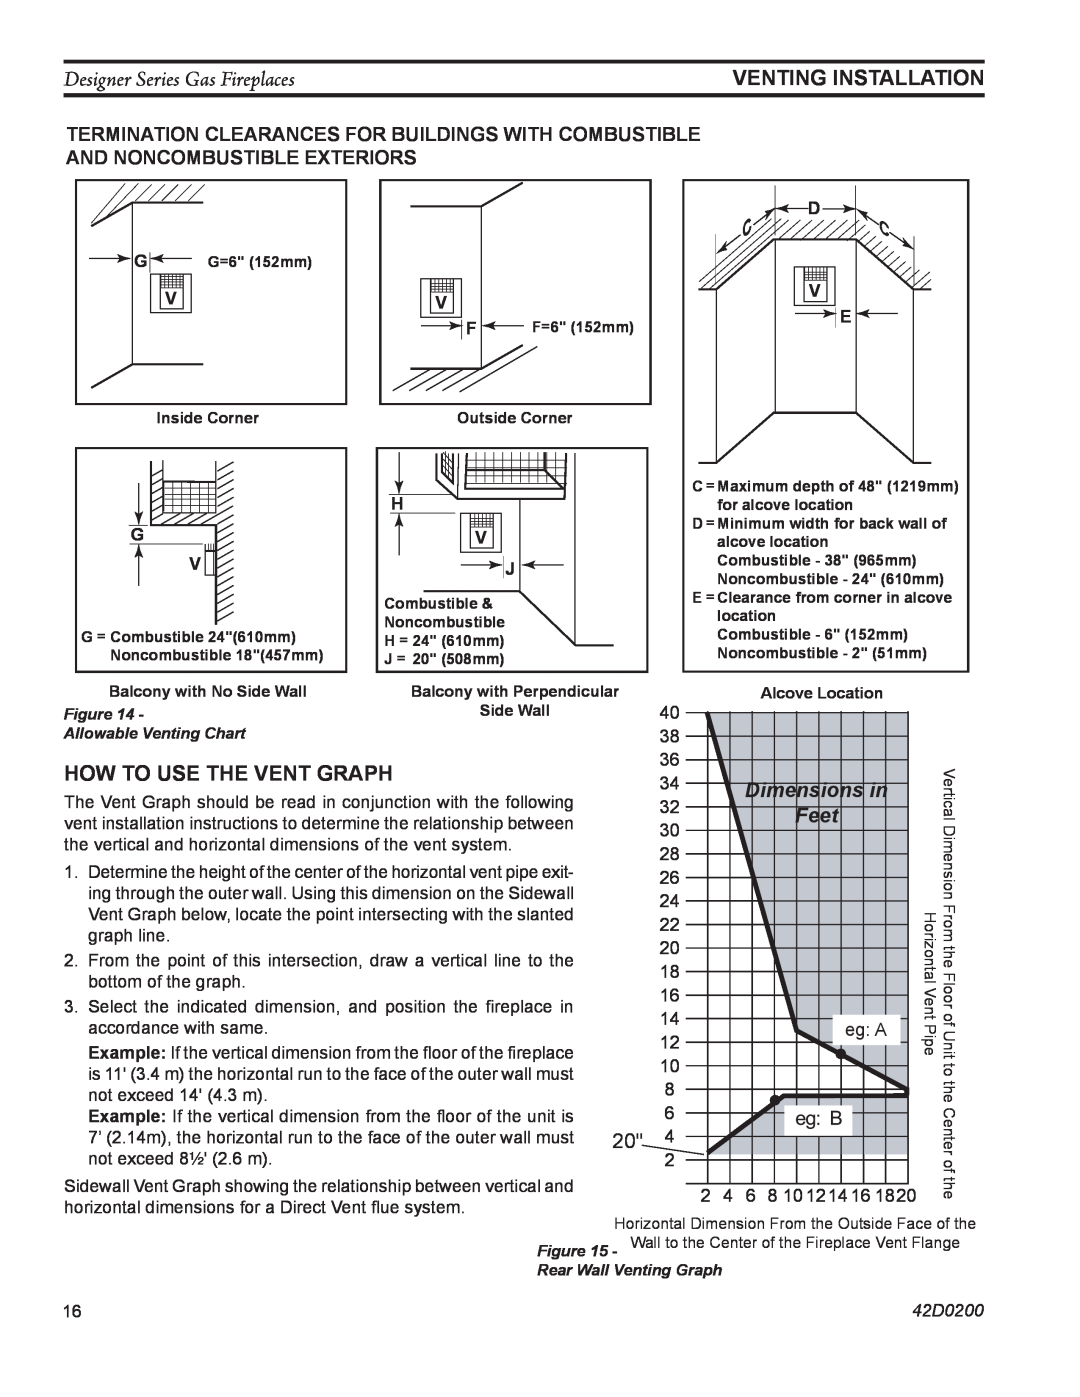 Monessen Hearth PF How To Use The Vent Graph, Dimensions in, Feet, Designer Series Gas Fireplaces, ventING installation 